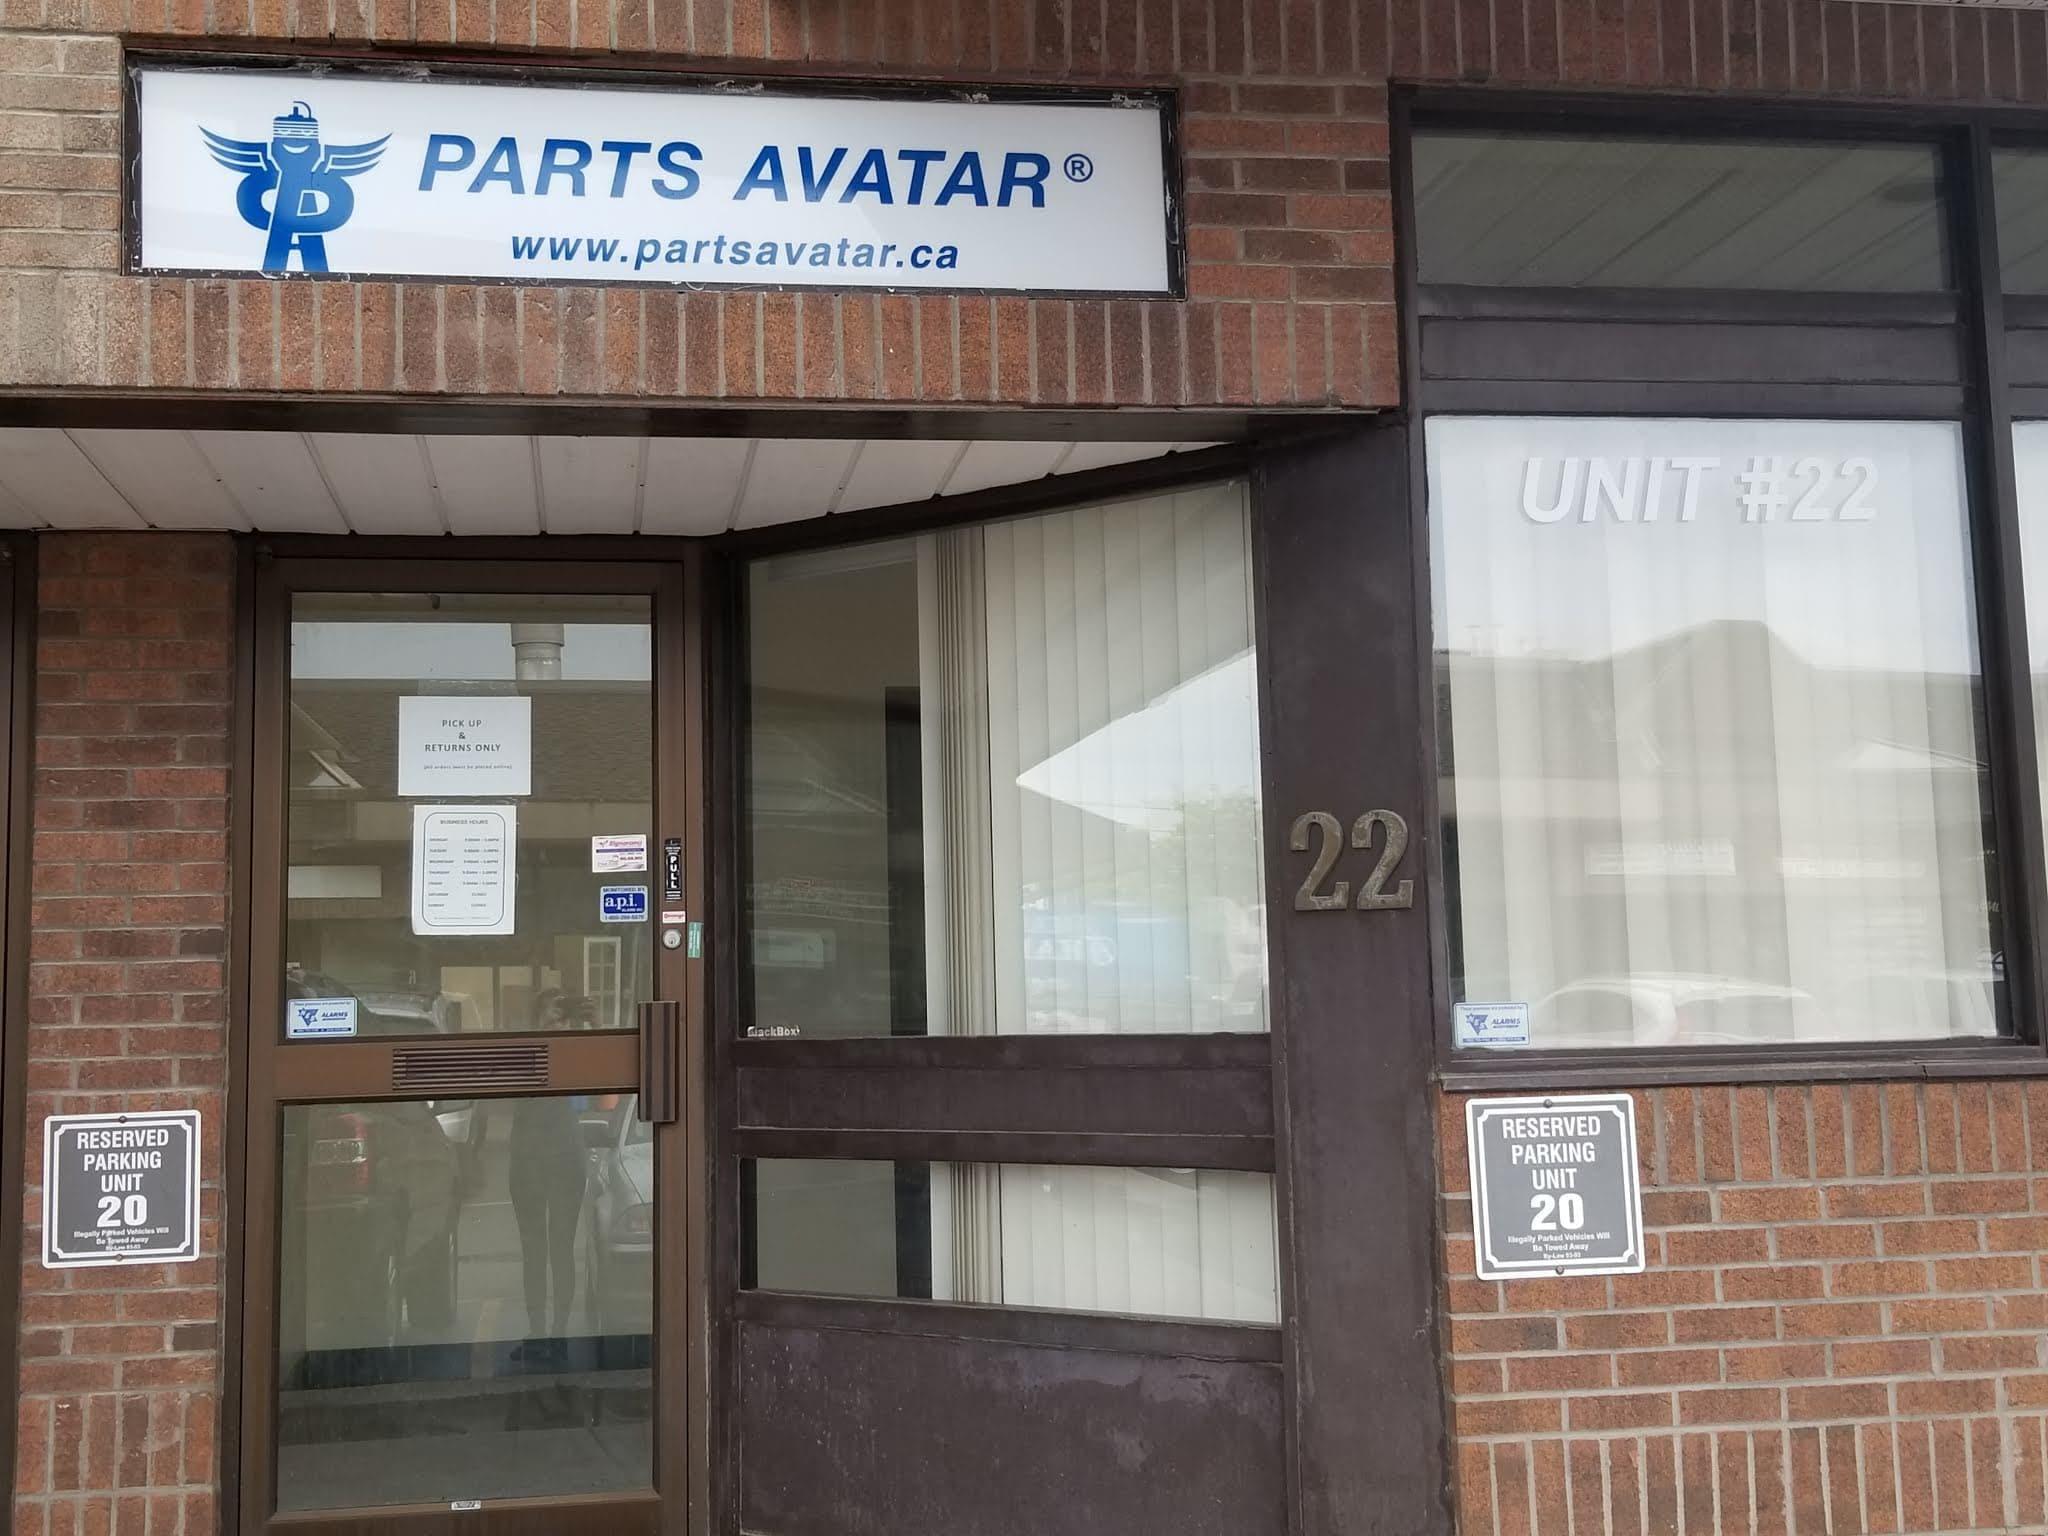 auto-parts-warehouse-supplier-location-near-me-free-pick-up-returns-in-store-drop-off-delivery-to-your-shop-home/images/autoparts-warehouse-partsavatar-brampton-gta-pickup-returns.jpeg